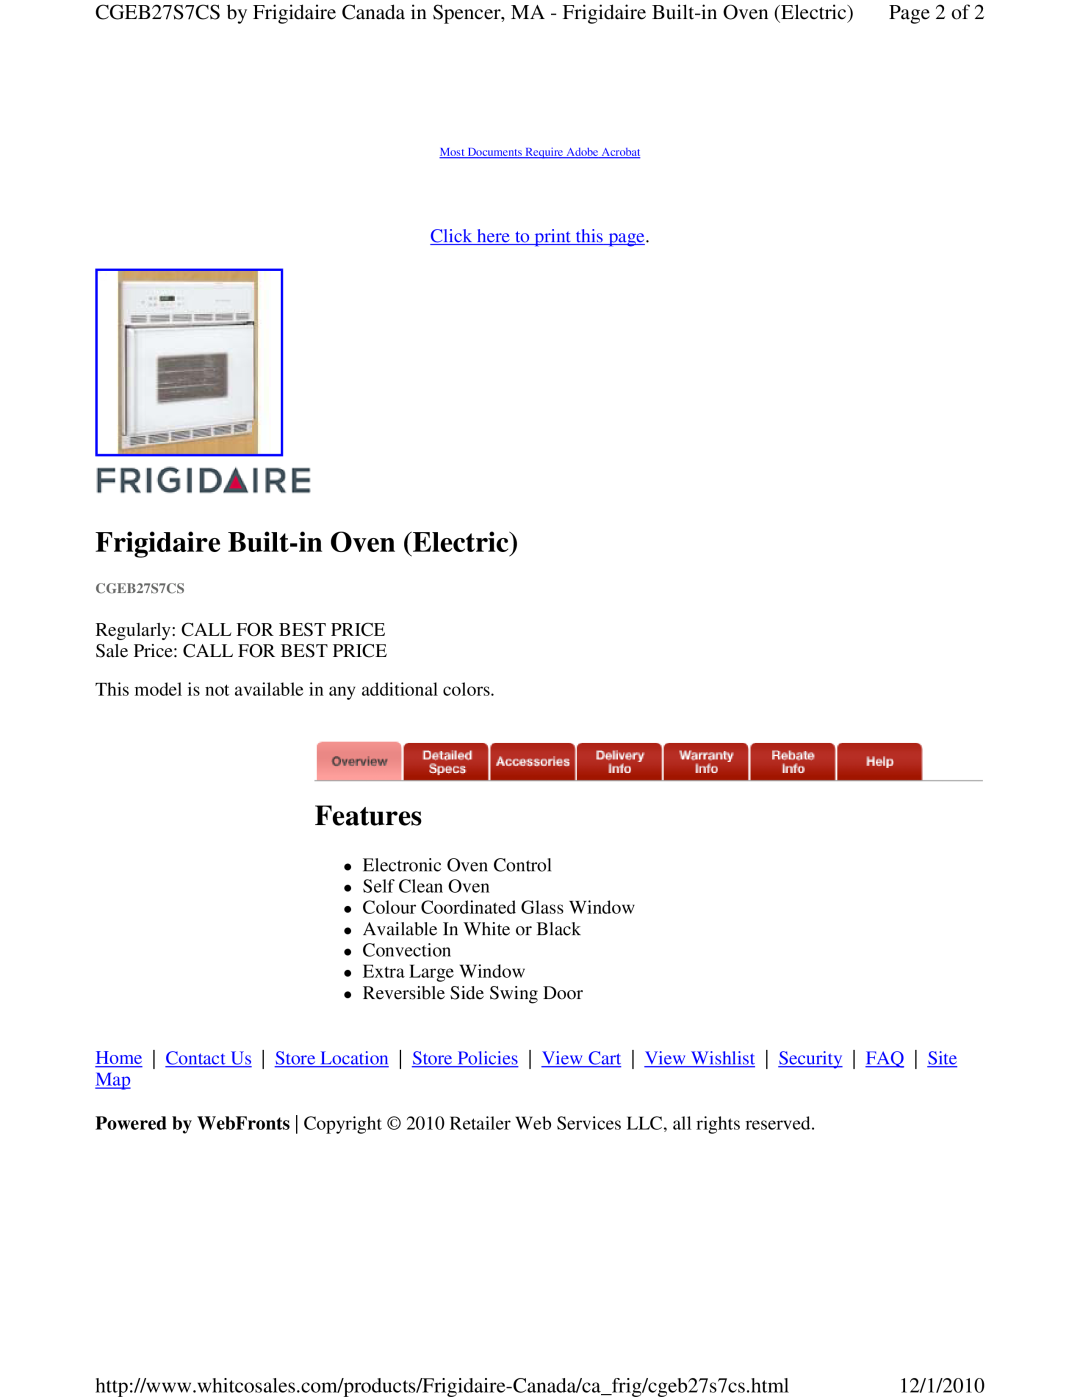 Maytag MEC7430W dimensions Frigidaire Built-in Oven Electric, Features, Click here to print this page 